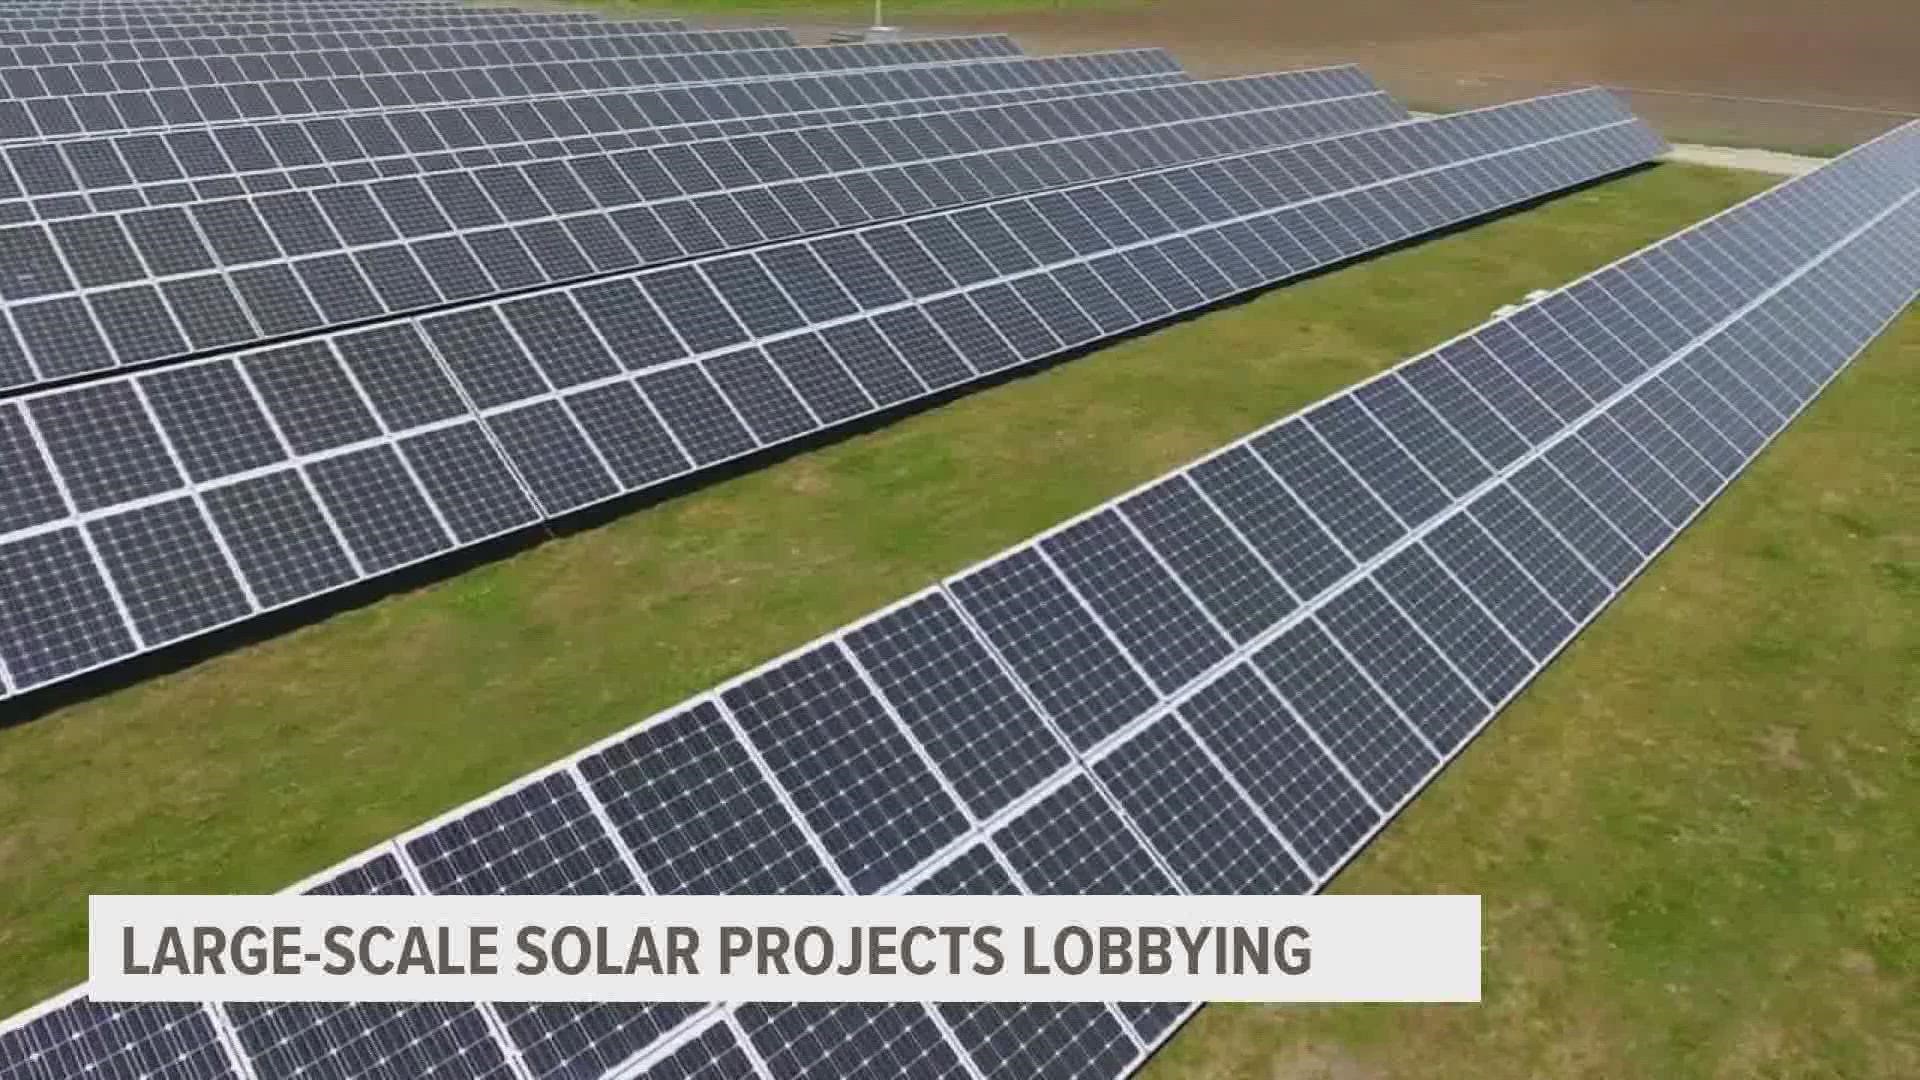 Elected leaders from across the state are taking meetings with Branstad, KCRG reports. Alliant Energy plans to build a large-scale solar plant near Cedar Rapids.